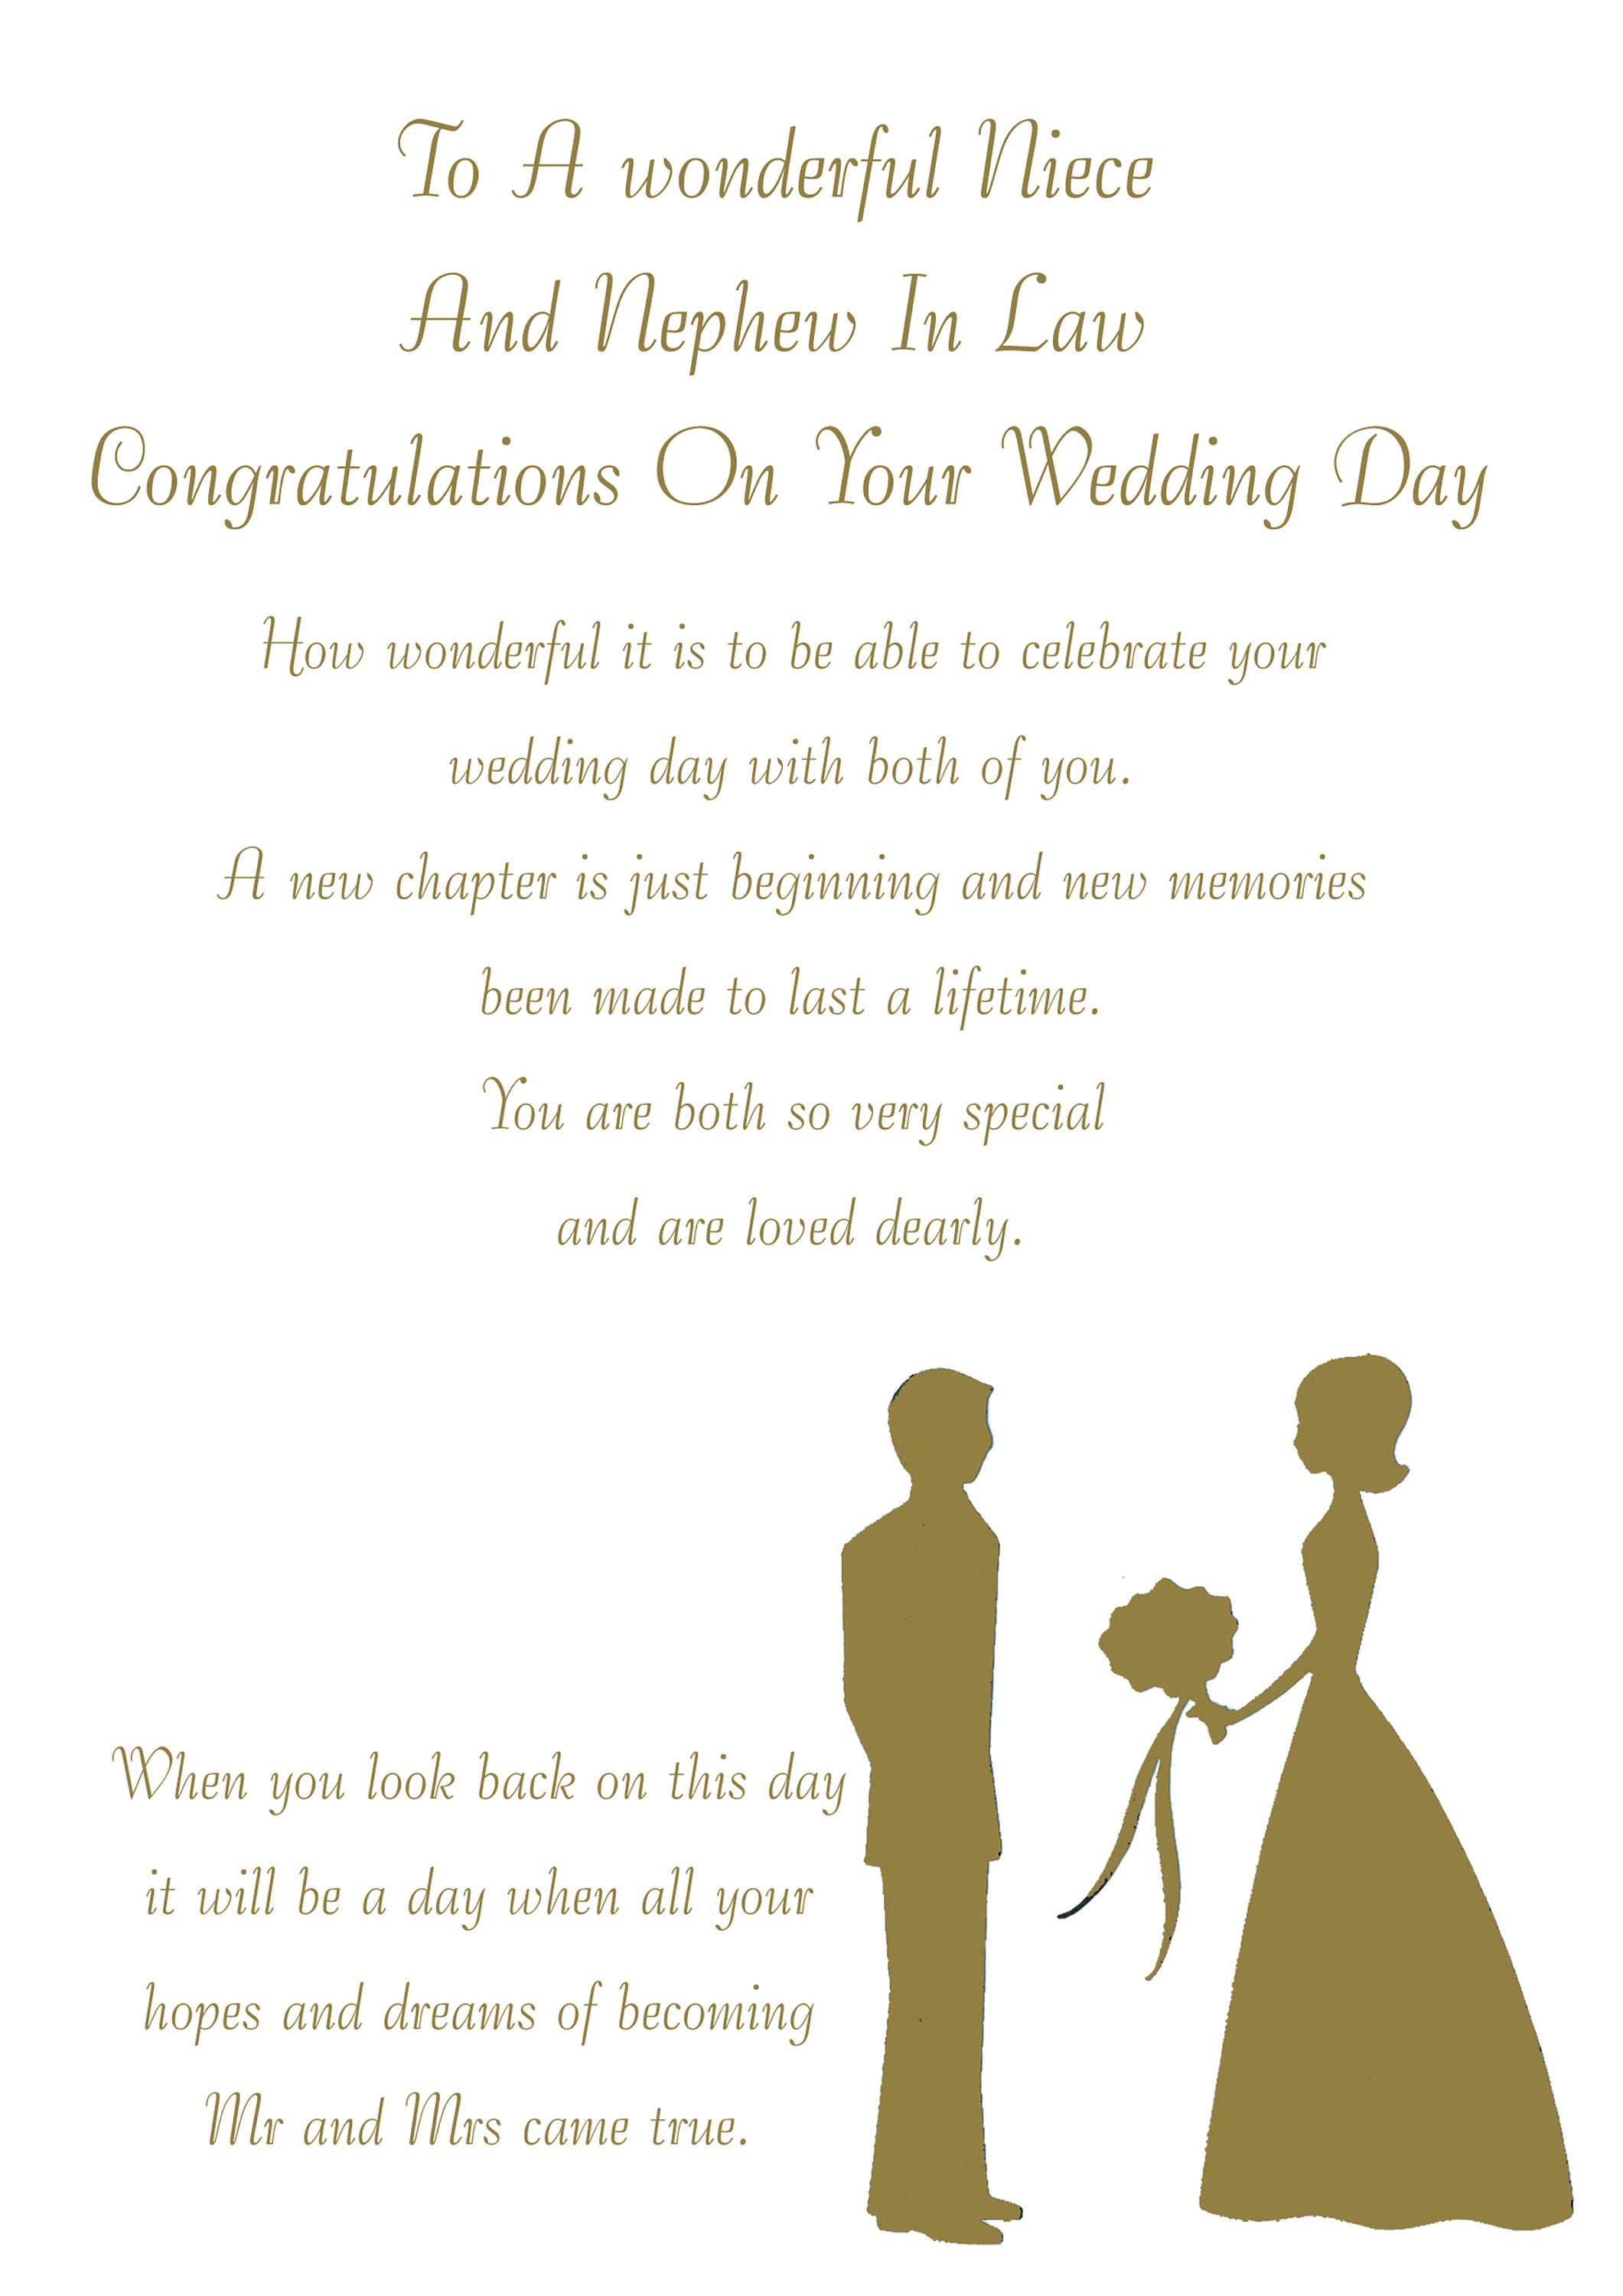 Niece and Nephew in Law Wedding Card